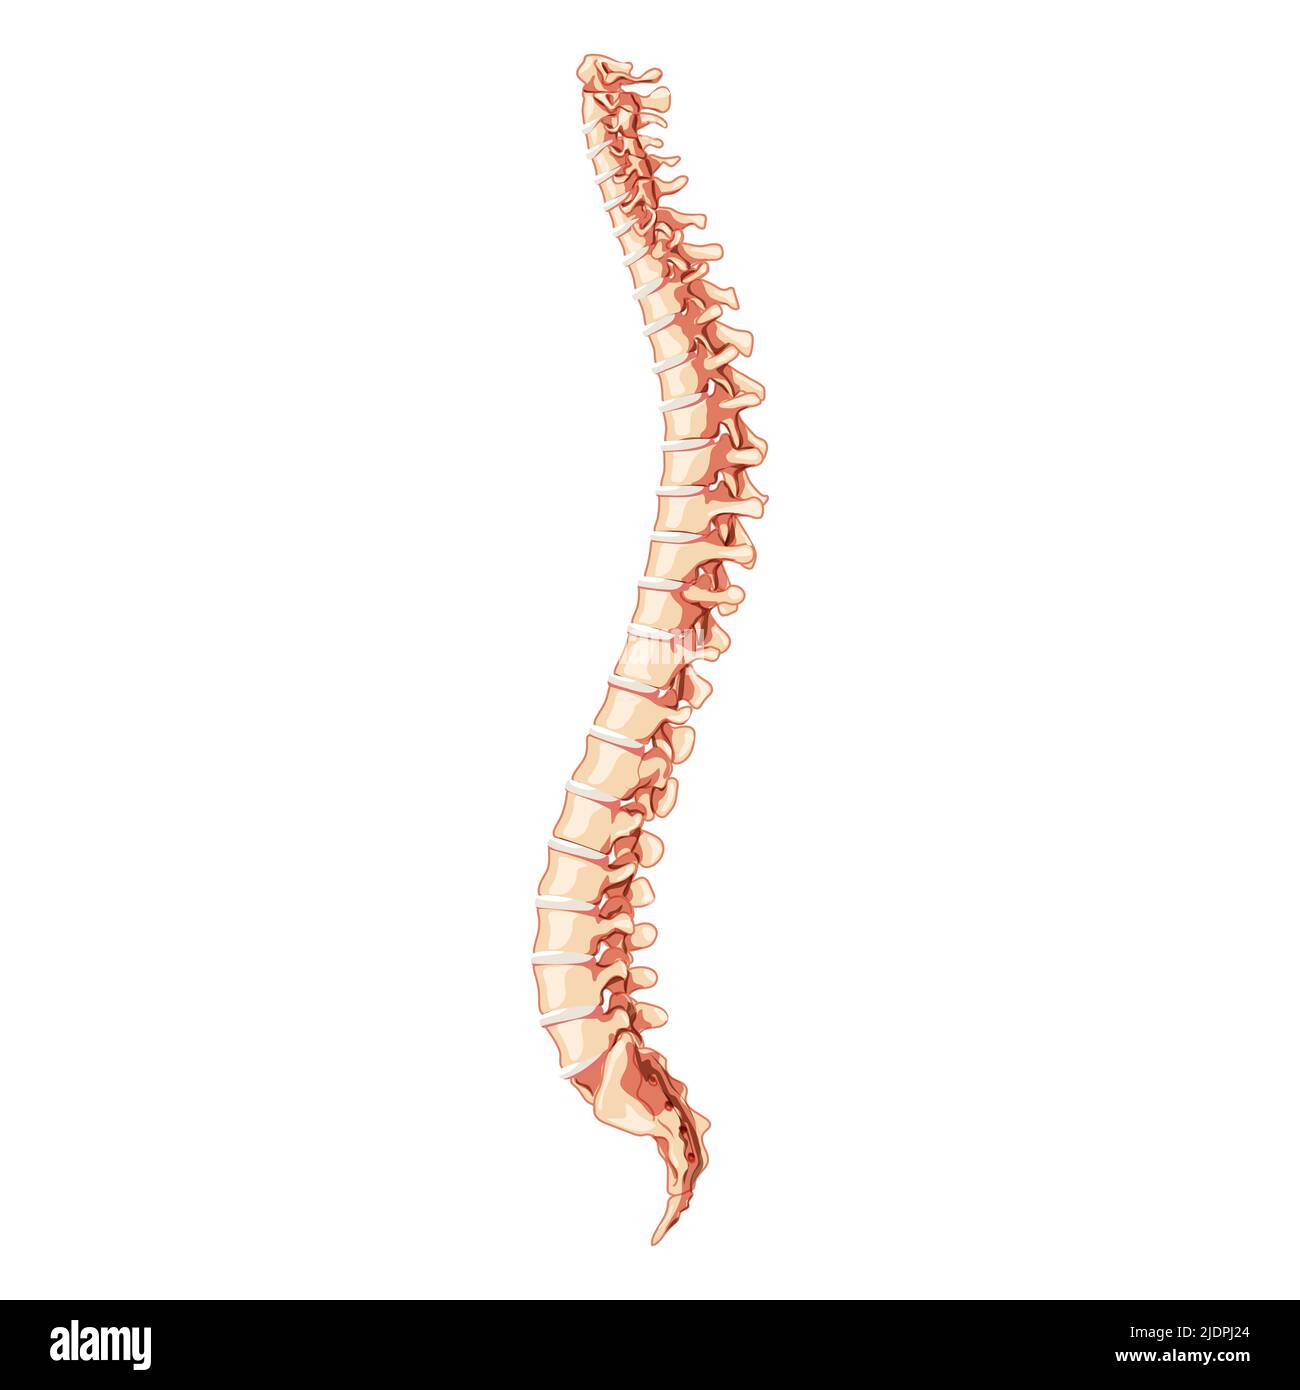 The human vertebral column spine anatomy side lateral with Intervertebral disc. Vector flat 3D realistic concept illustration in natural colors, spine isolated on white background. Stock Vector